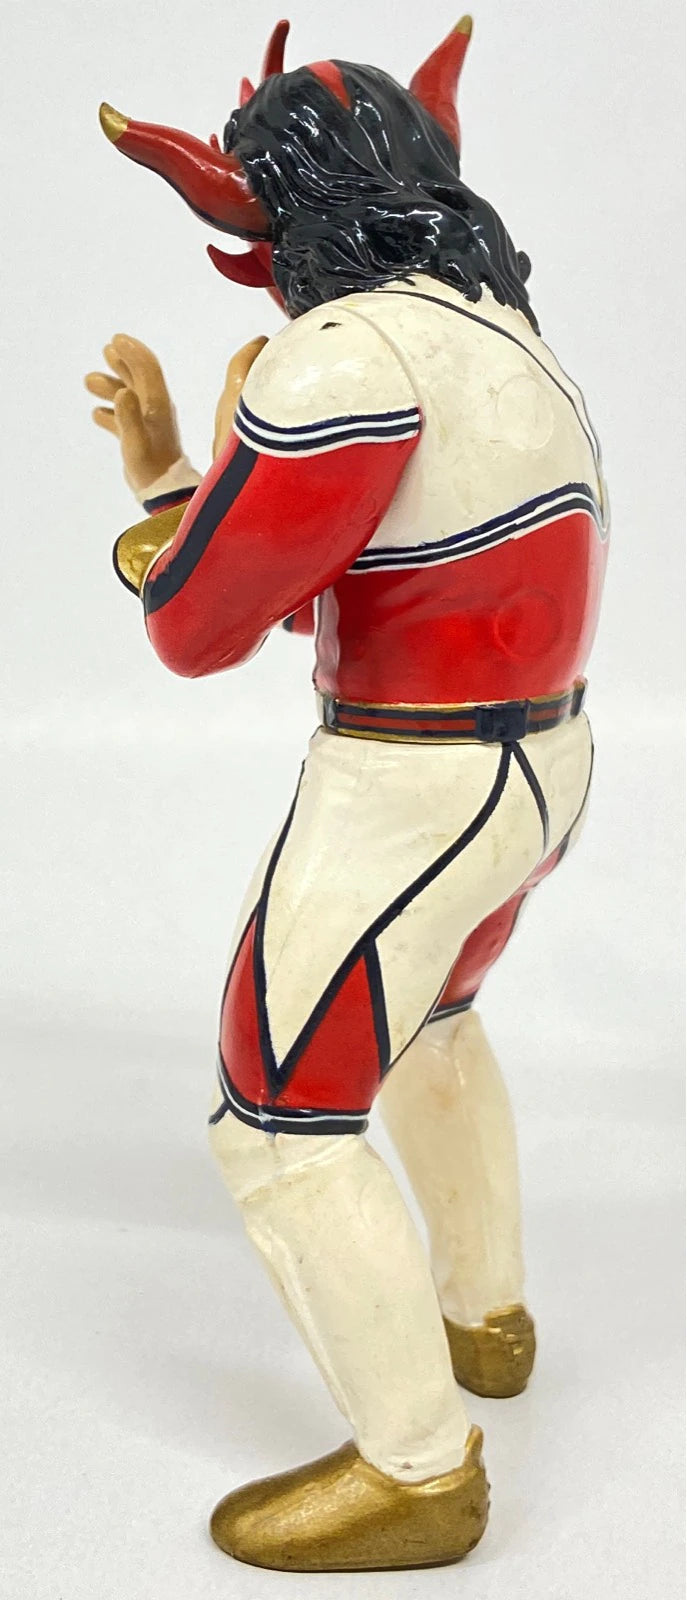 1998 NJPW CharaPro Super Star Figure Collection Series 10 Jyushin "Thunder" Liger [With Gold Boots]